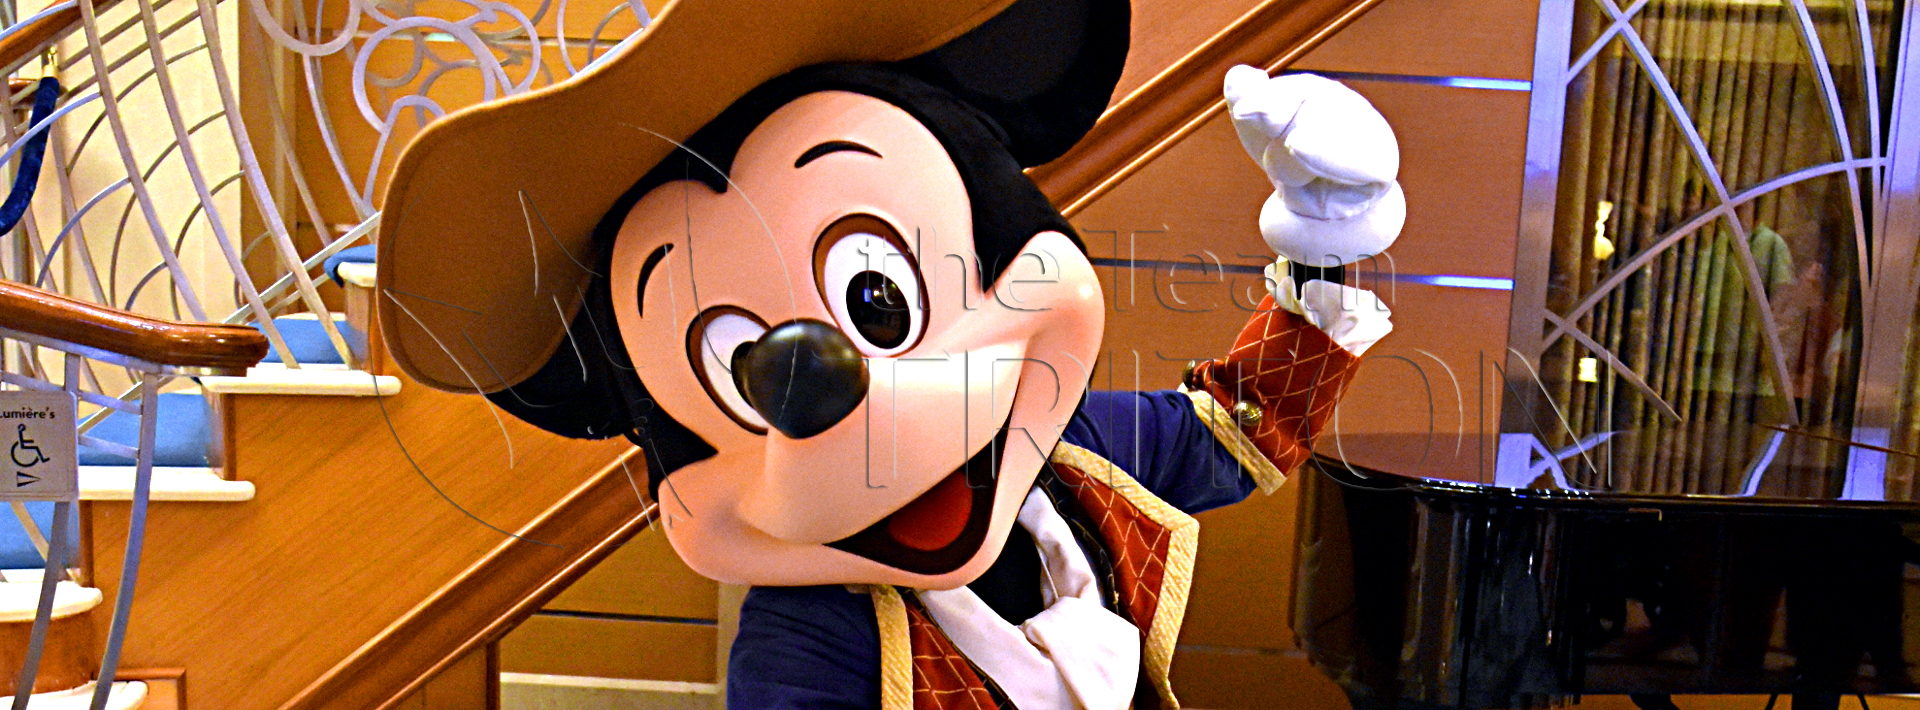 mickey-greeting-dcl-pirate